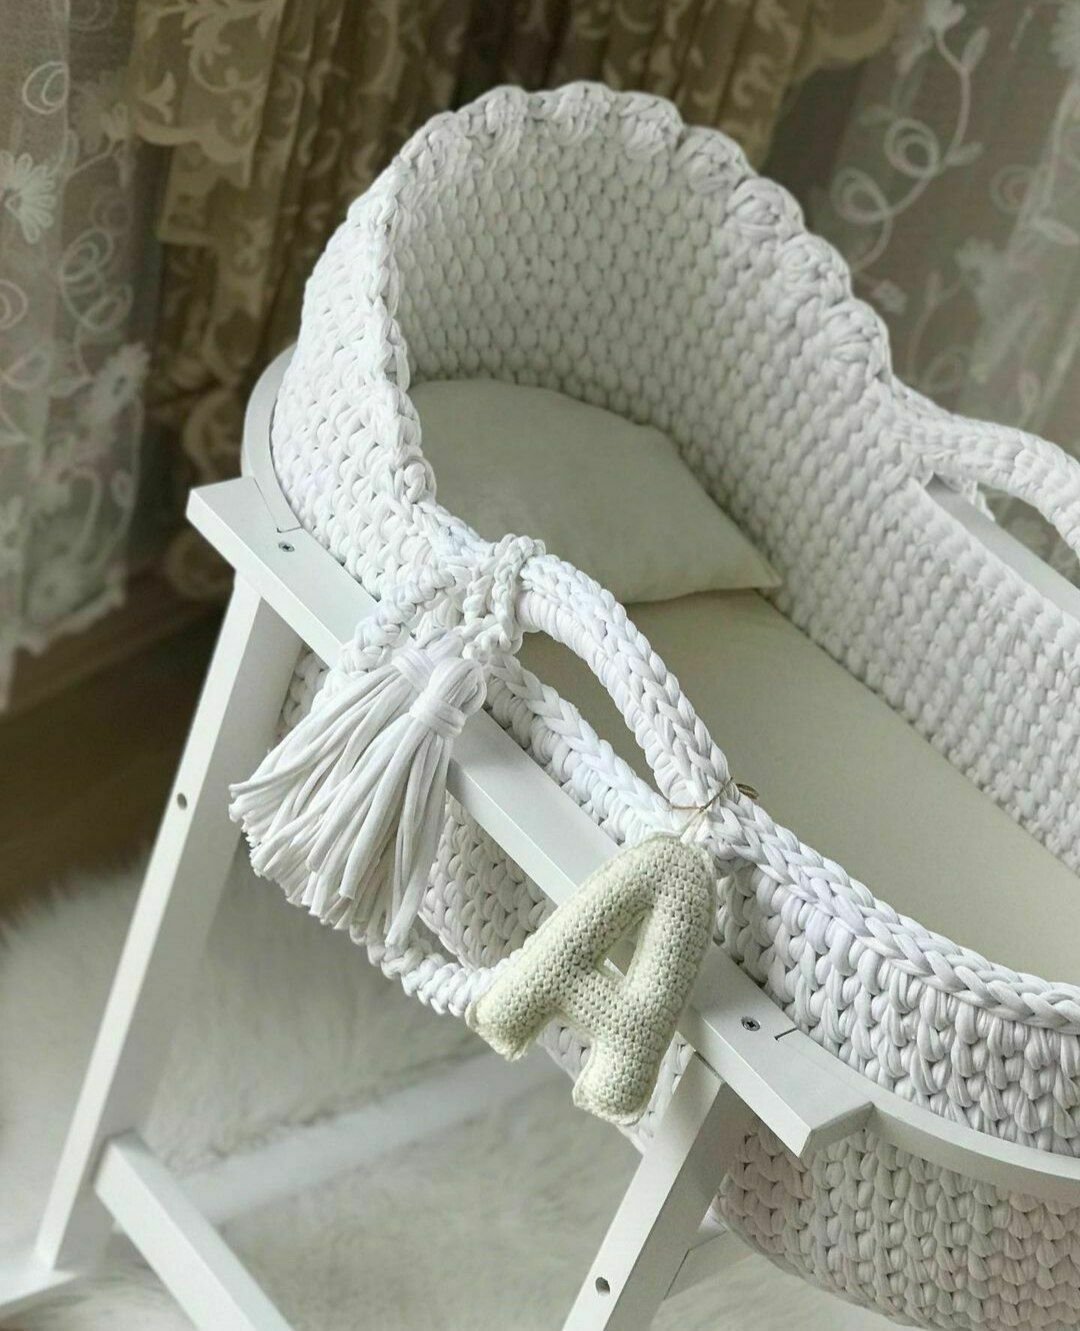 Knit Poufs Rugs Chunky Blankets Newborn Baby Baskets Infant Cradle Cot Nest Beds